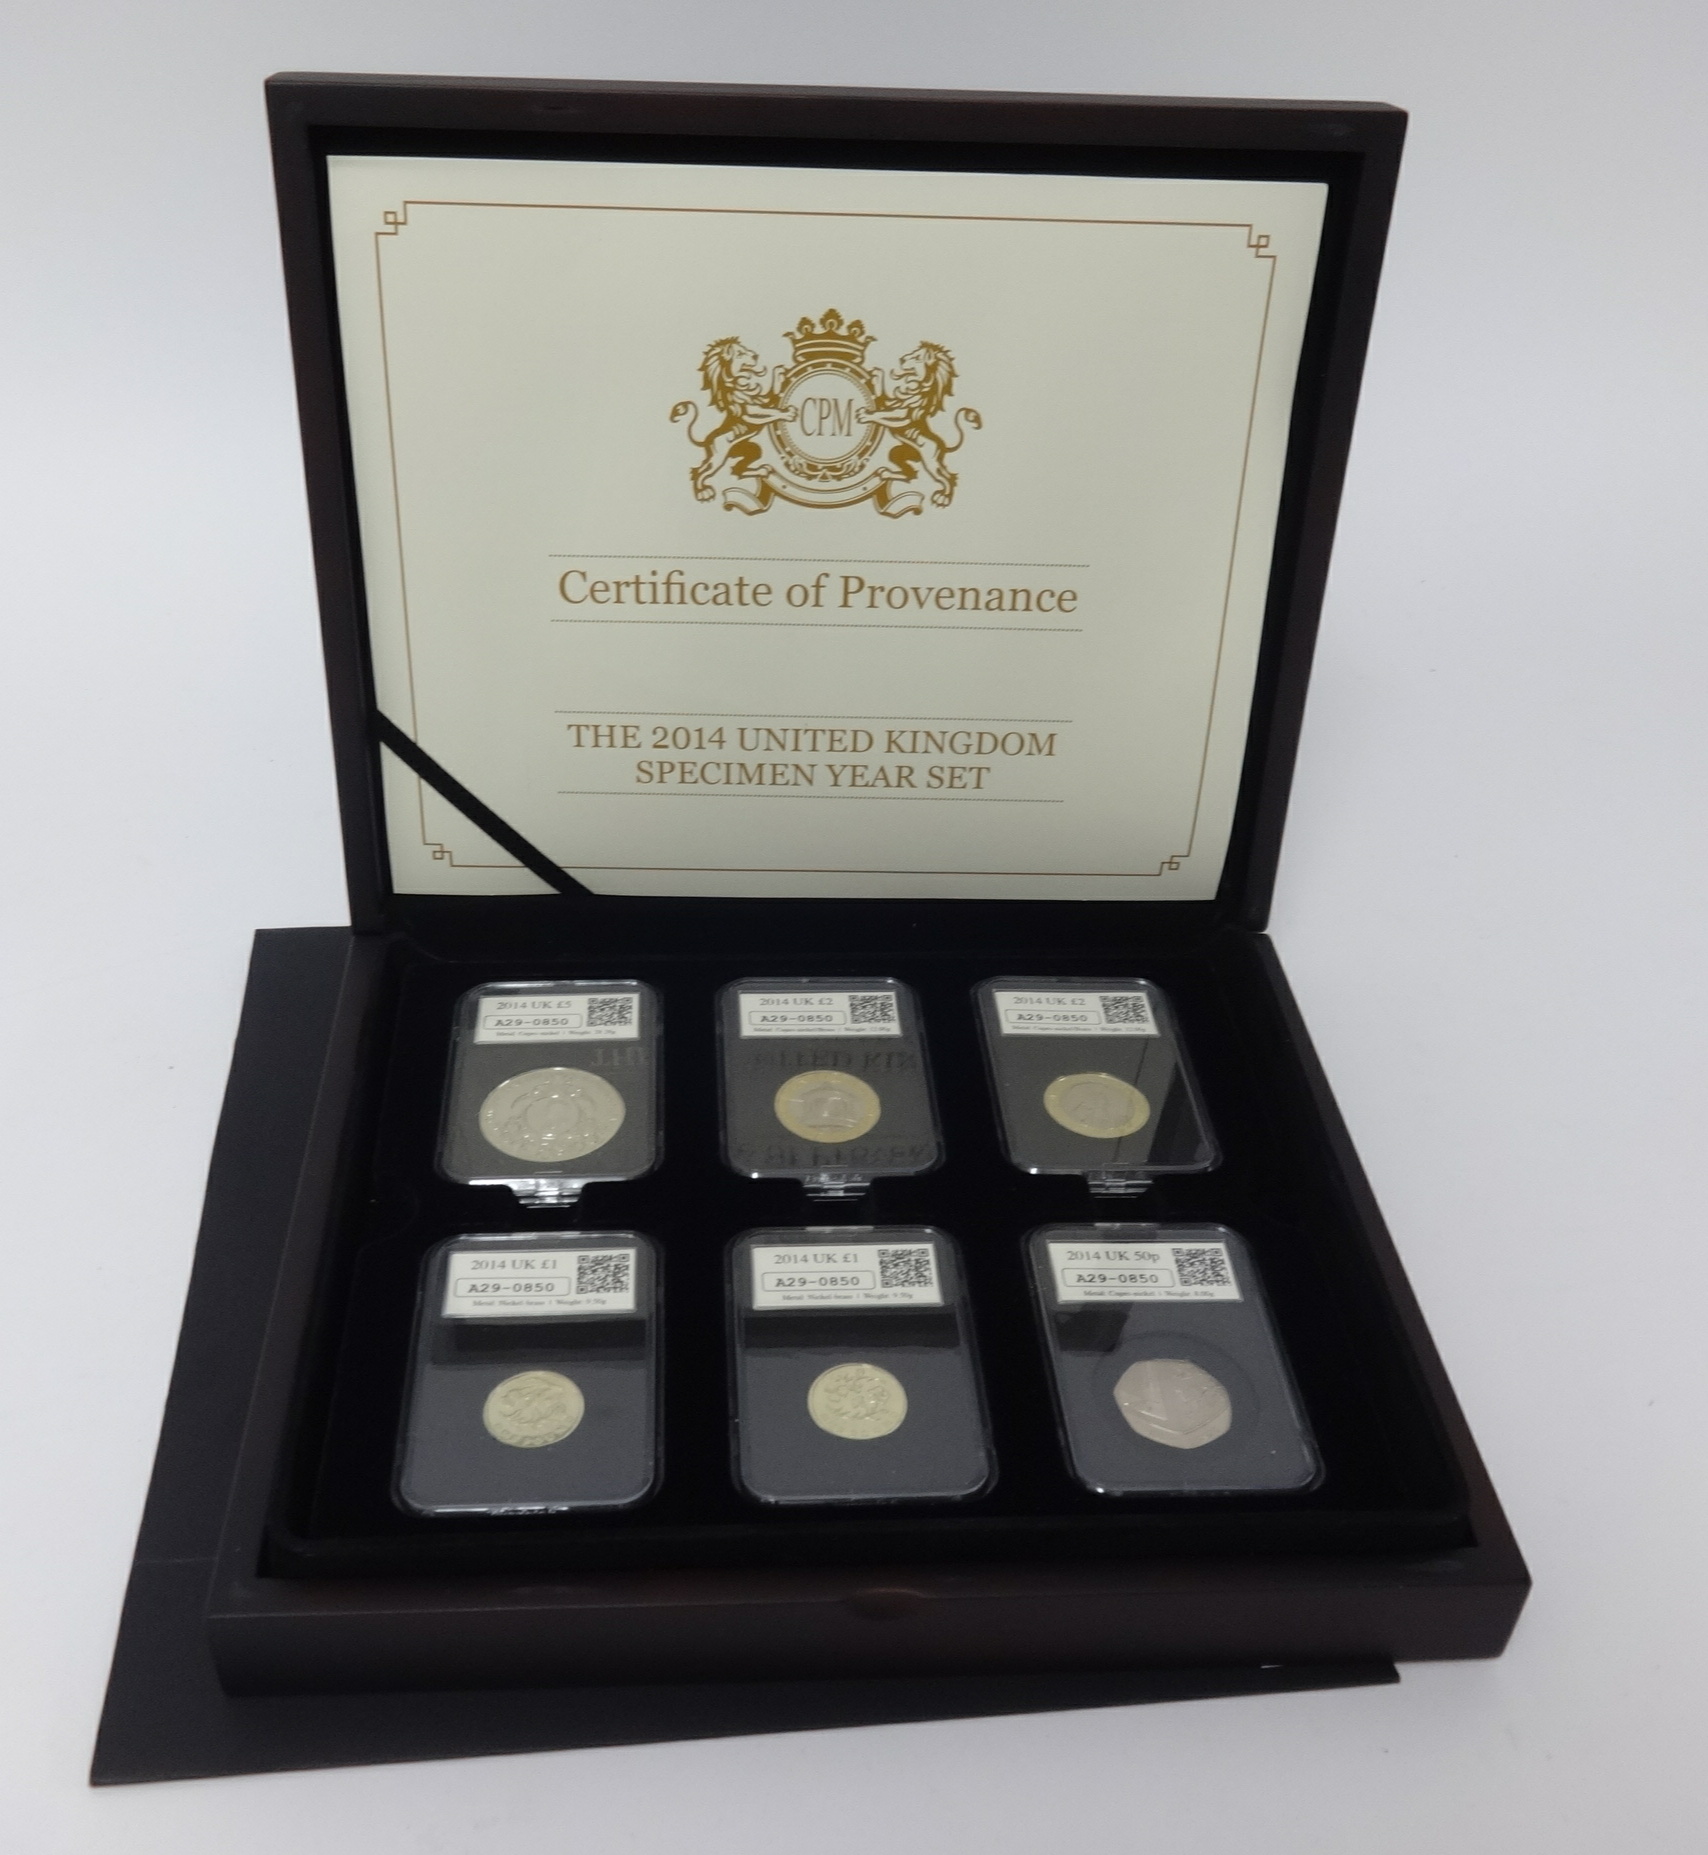 Royal Mint, CPM the 2014 specimen year set of six coins.